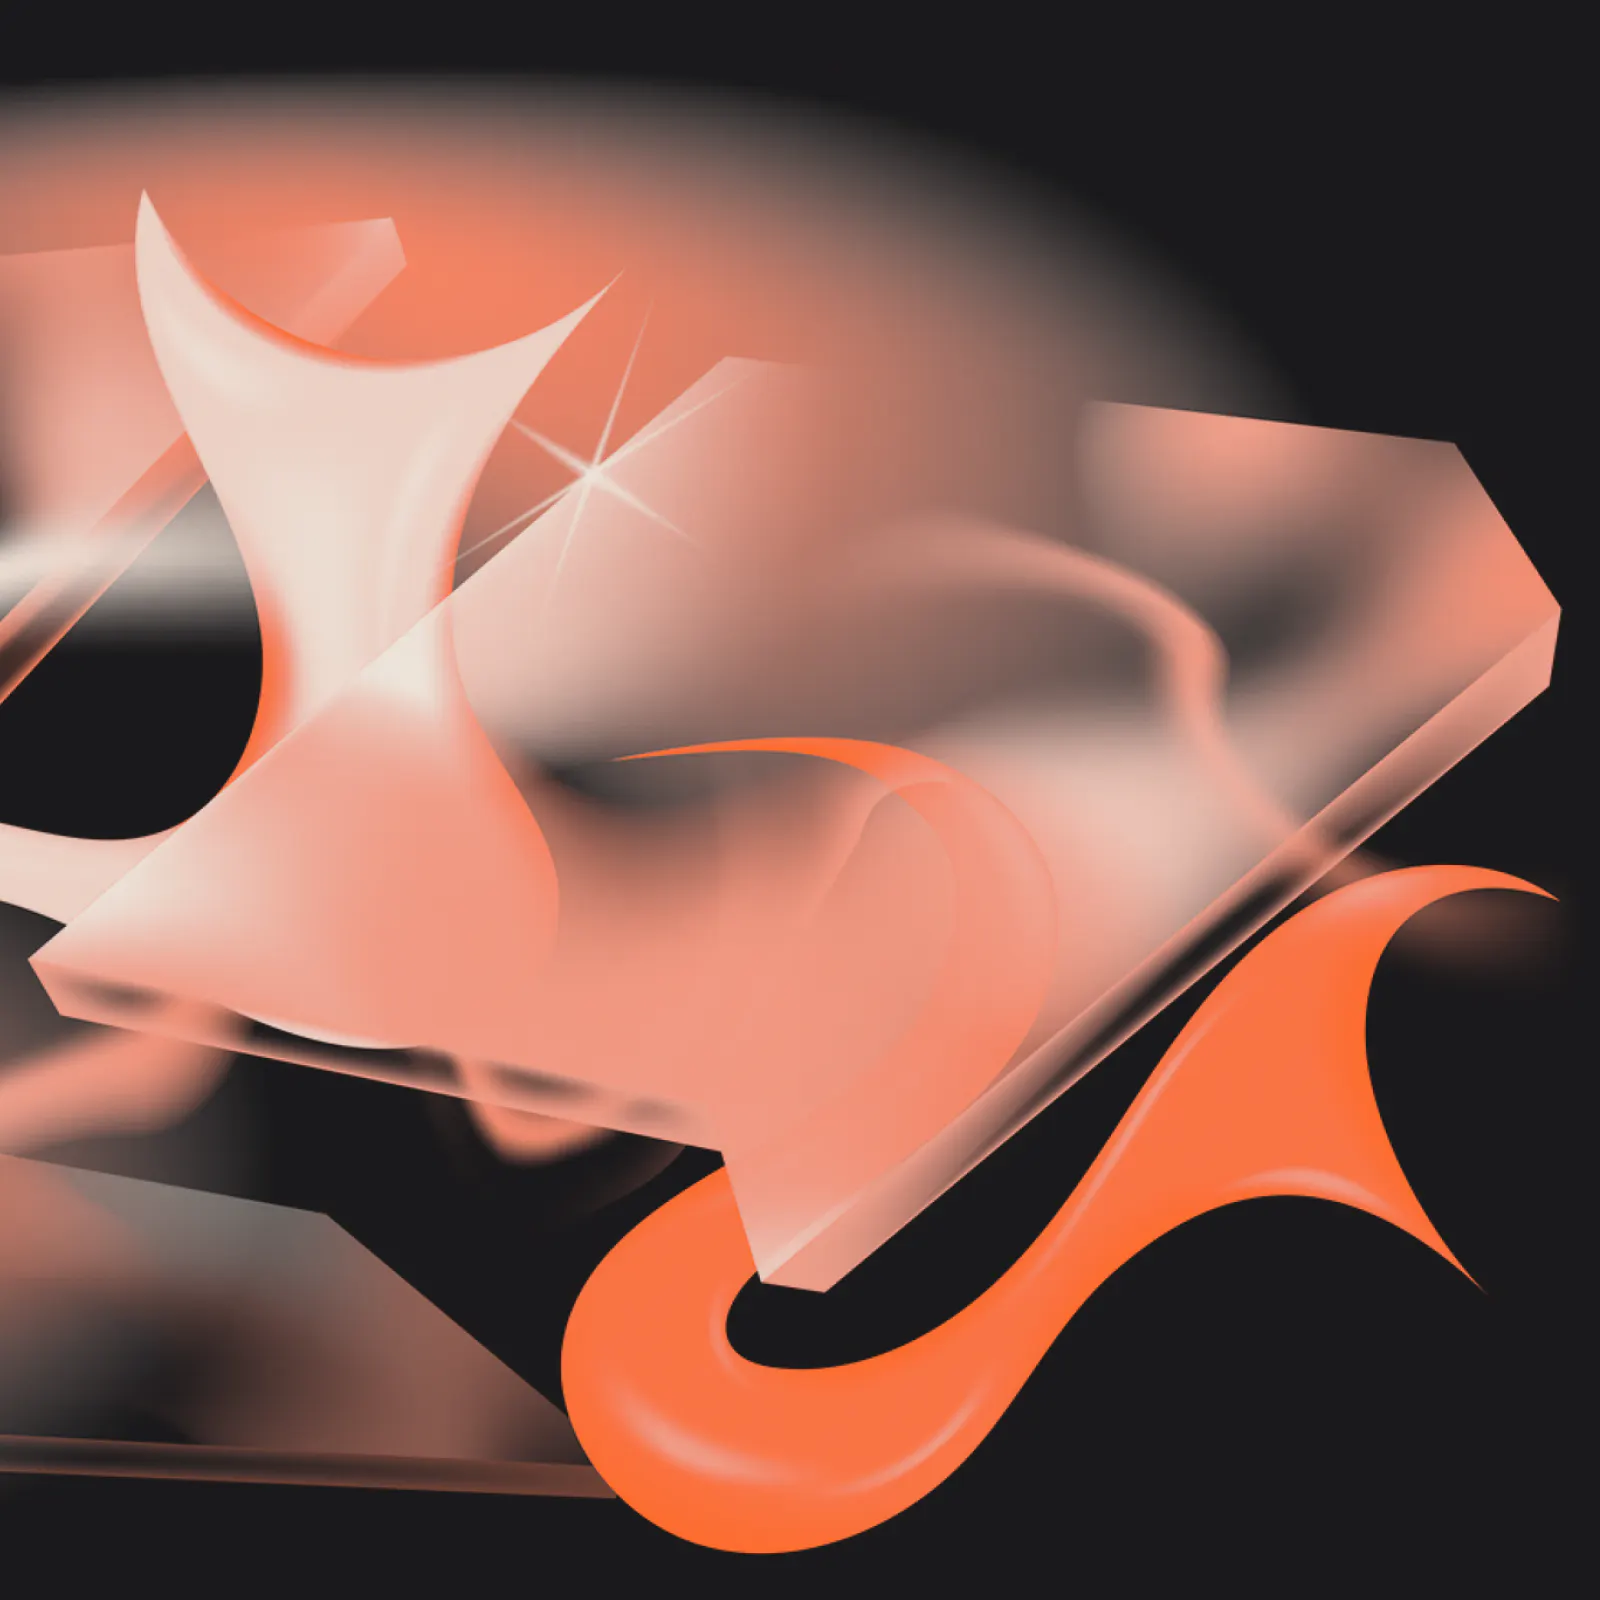 Swirling orange and black shapes -Let creativity flow, with all its twists and turns